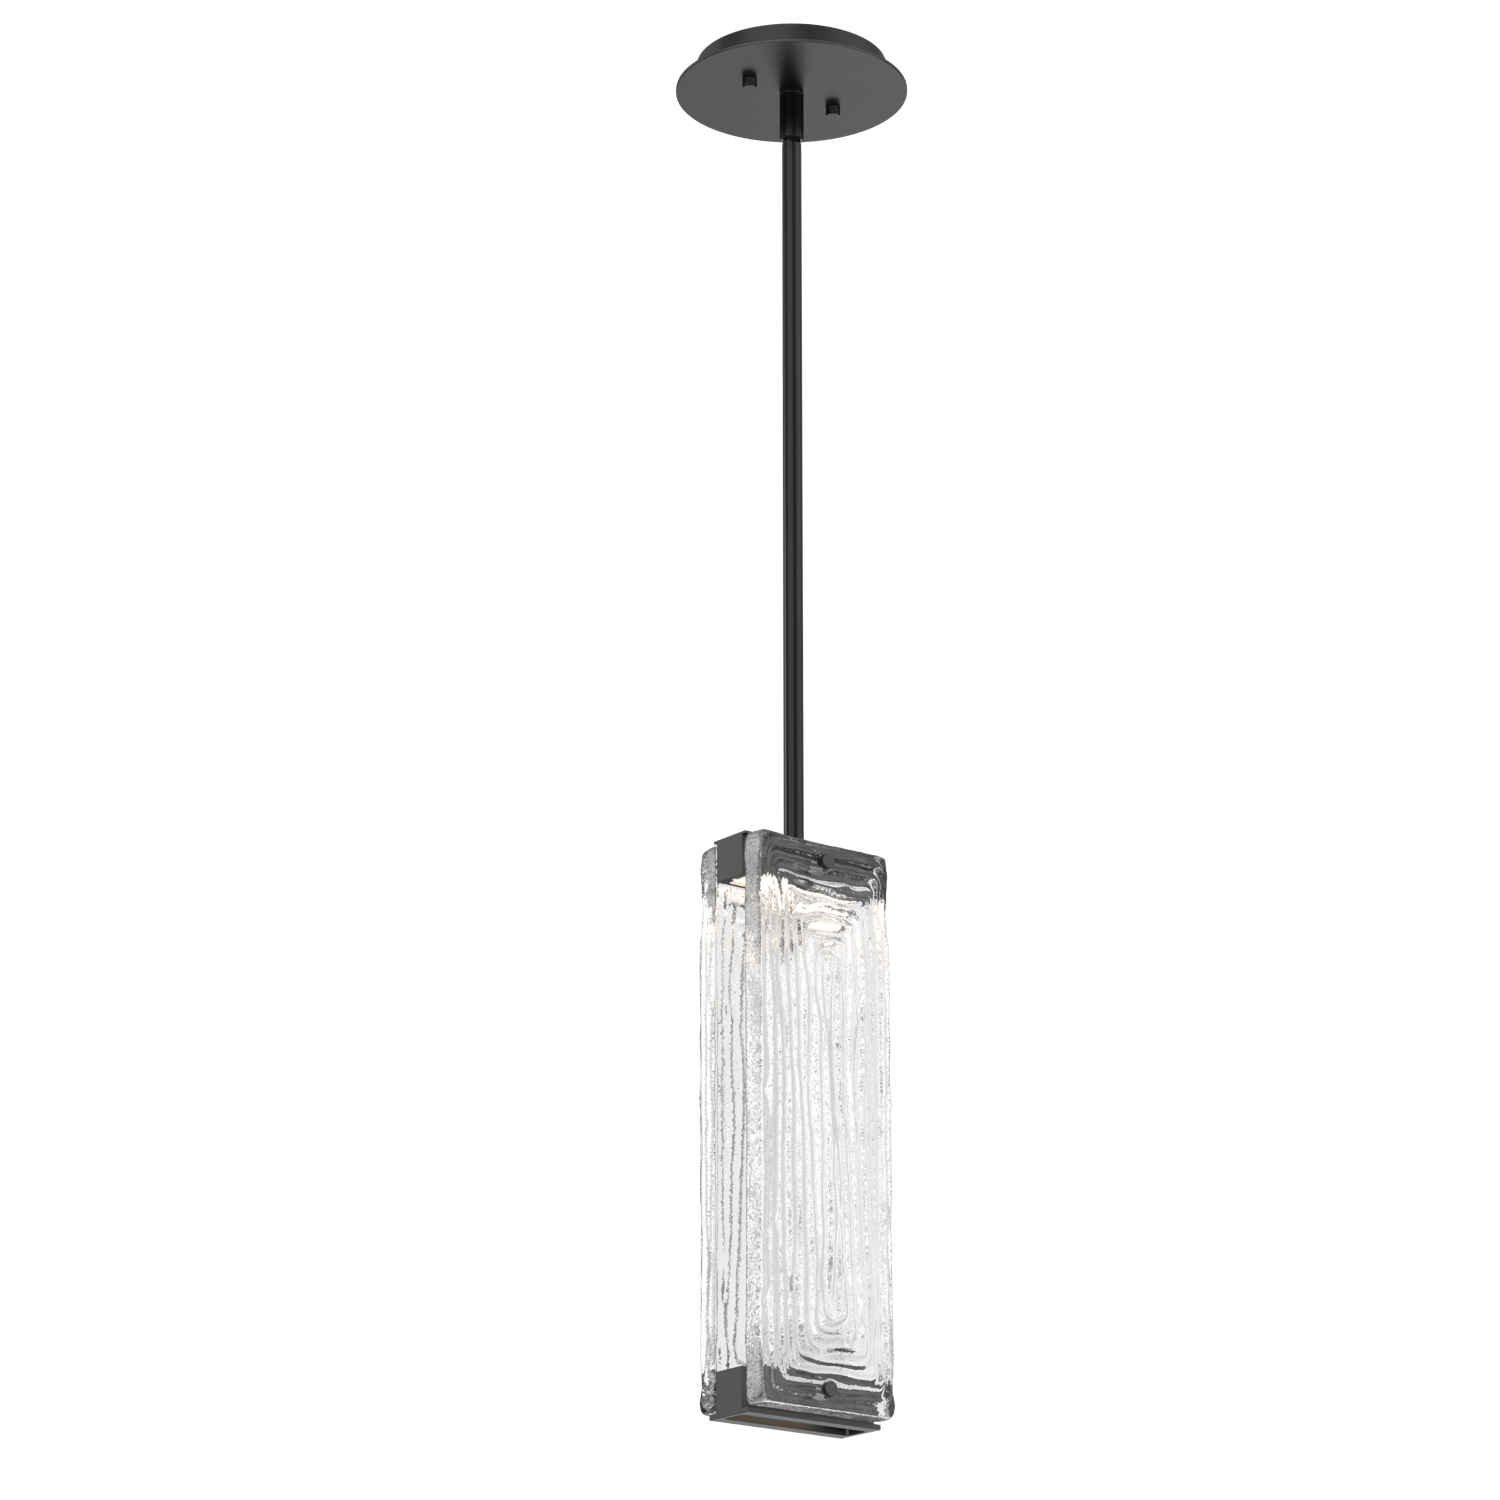 LAB0090-01-MB-TL-Hammerton-Studio-Tabulo-pendant-light-with-matte-black-finish-and-clear-linea-cast-glass-shade-and-LED-lamping